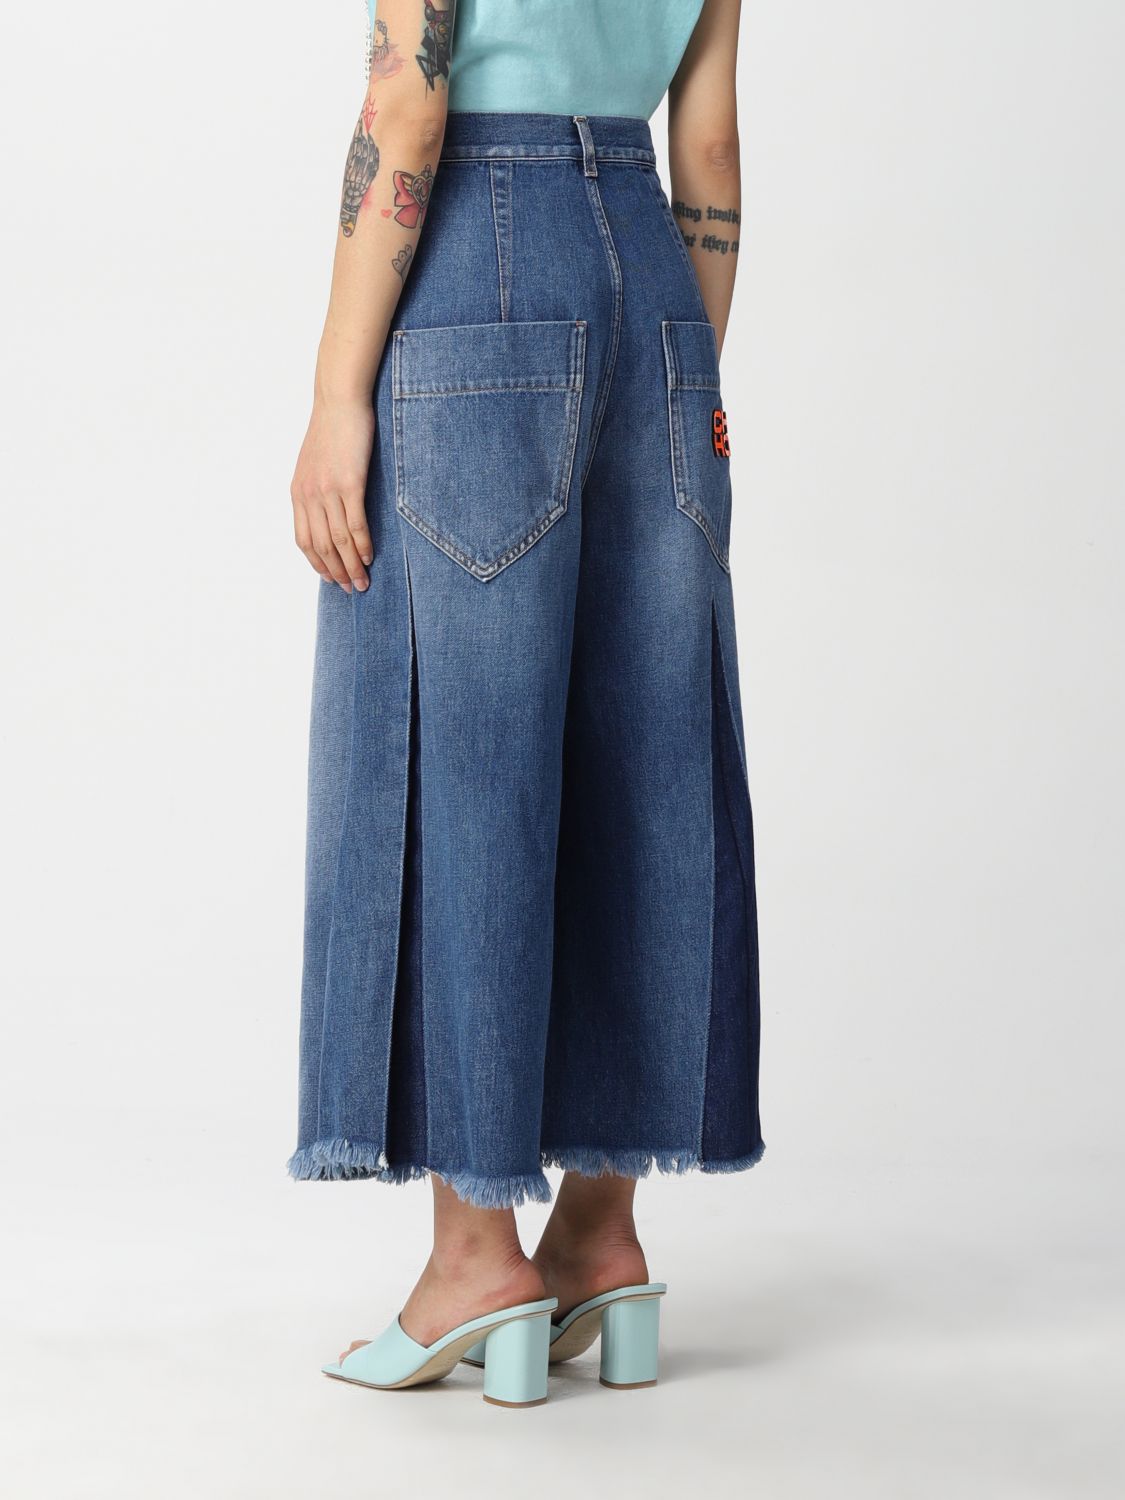 Jeans Circus Hotel: Circus Hotel cropped jeans in washed denim denim 2